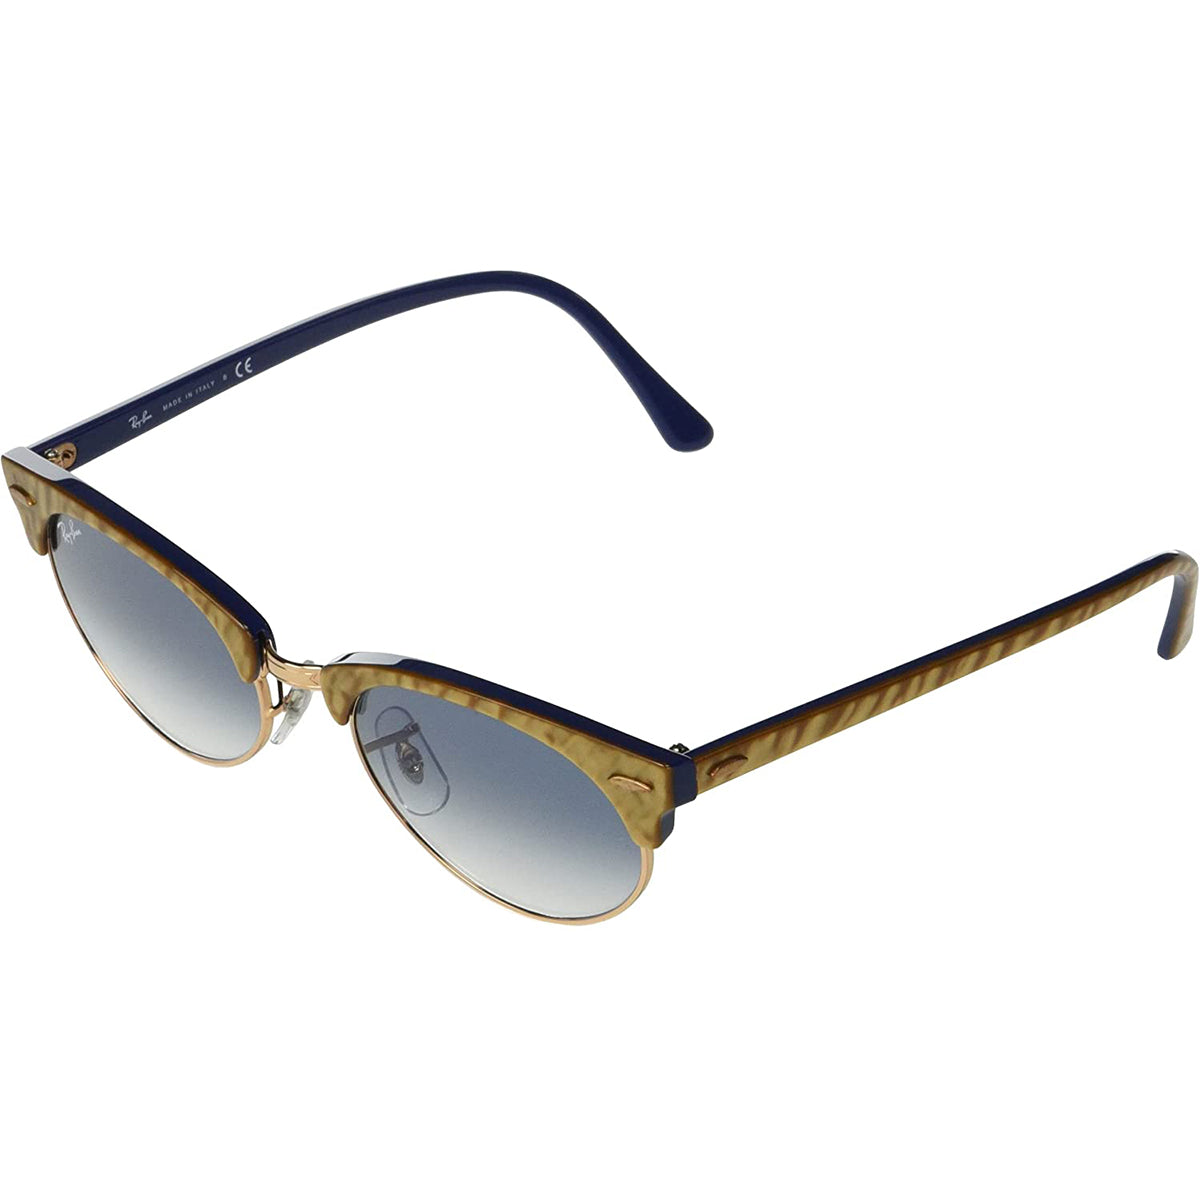 Ray-Ban Clubmaster Oval Adult Lifestyle Sunglasses-0RB3946